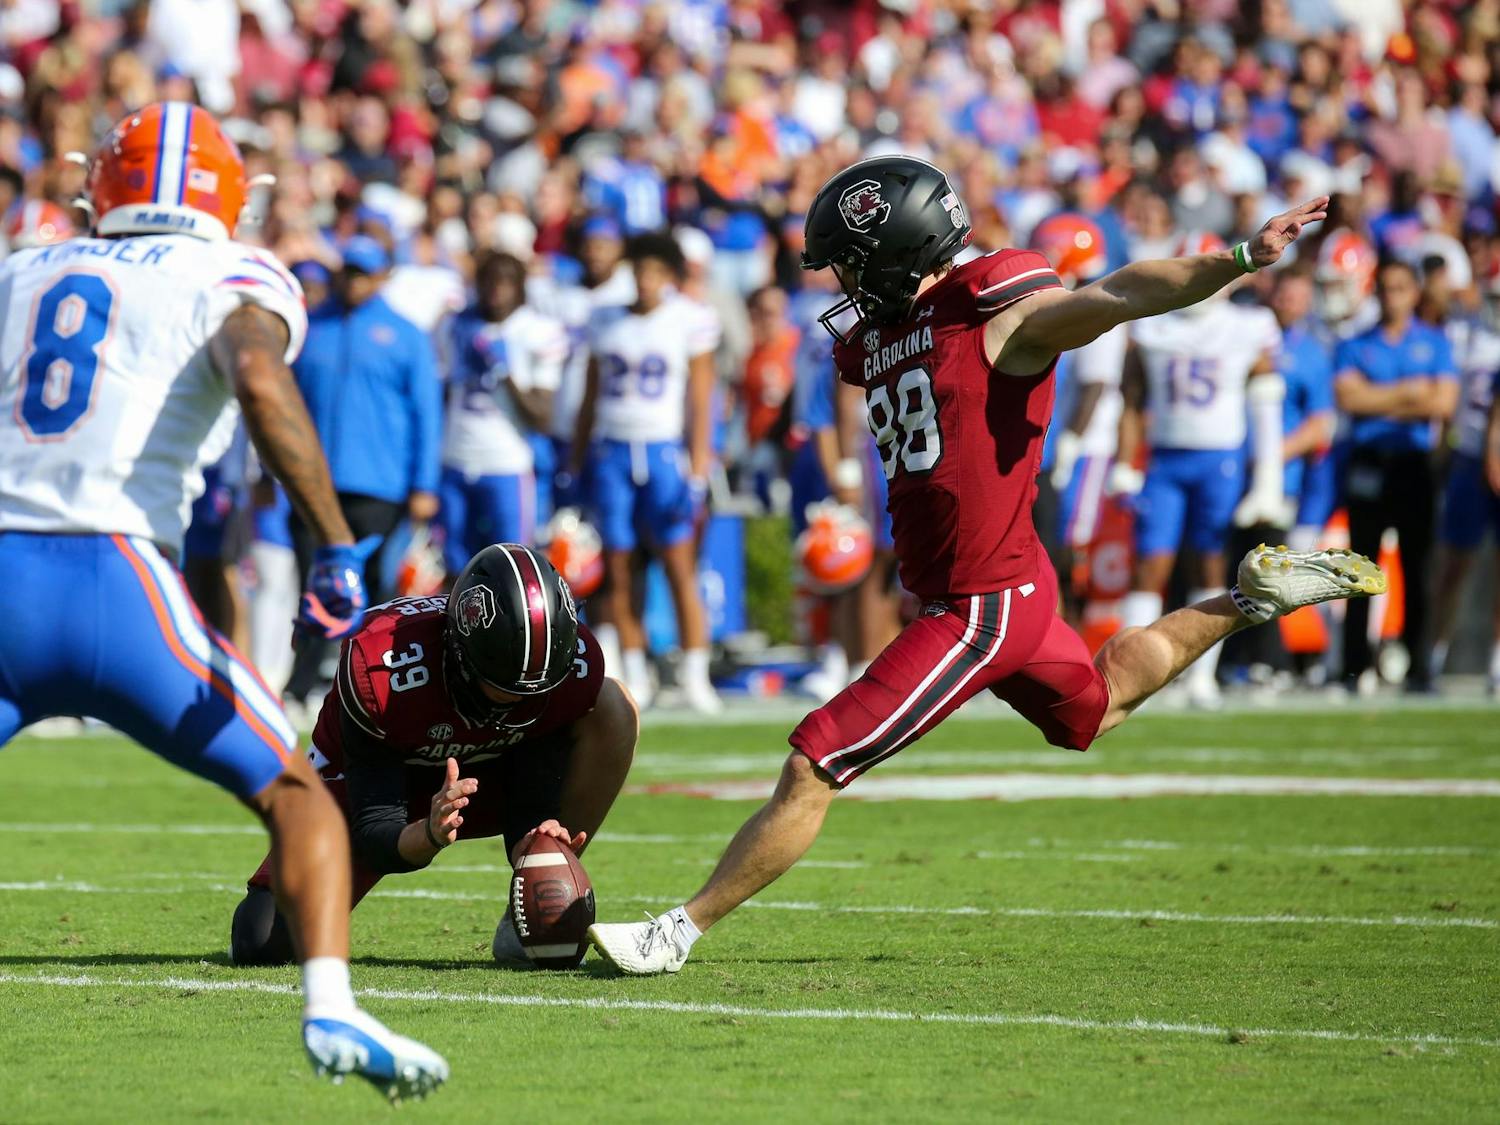 Senior place kicker Mitch Jeter kicks the point after a touchdown during South Carolina’s game against Florida on Oct. 14, 2023, at Williams-Brice Stadium. Jeter converted each of his extra point and field goal opportunities in the game.